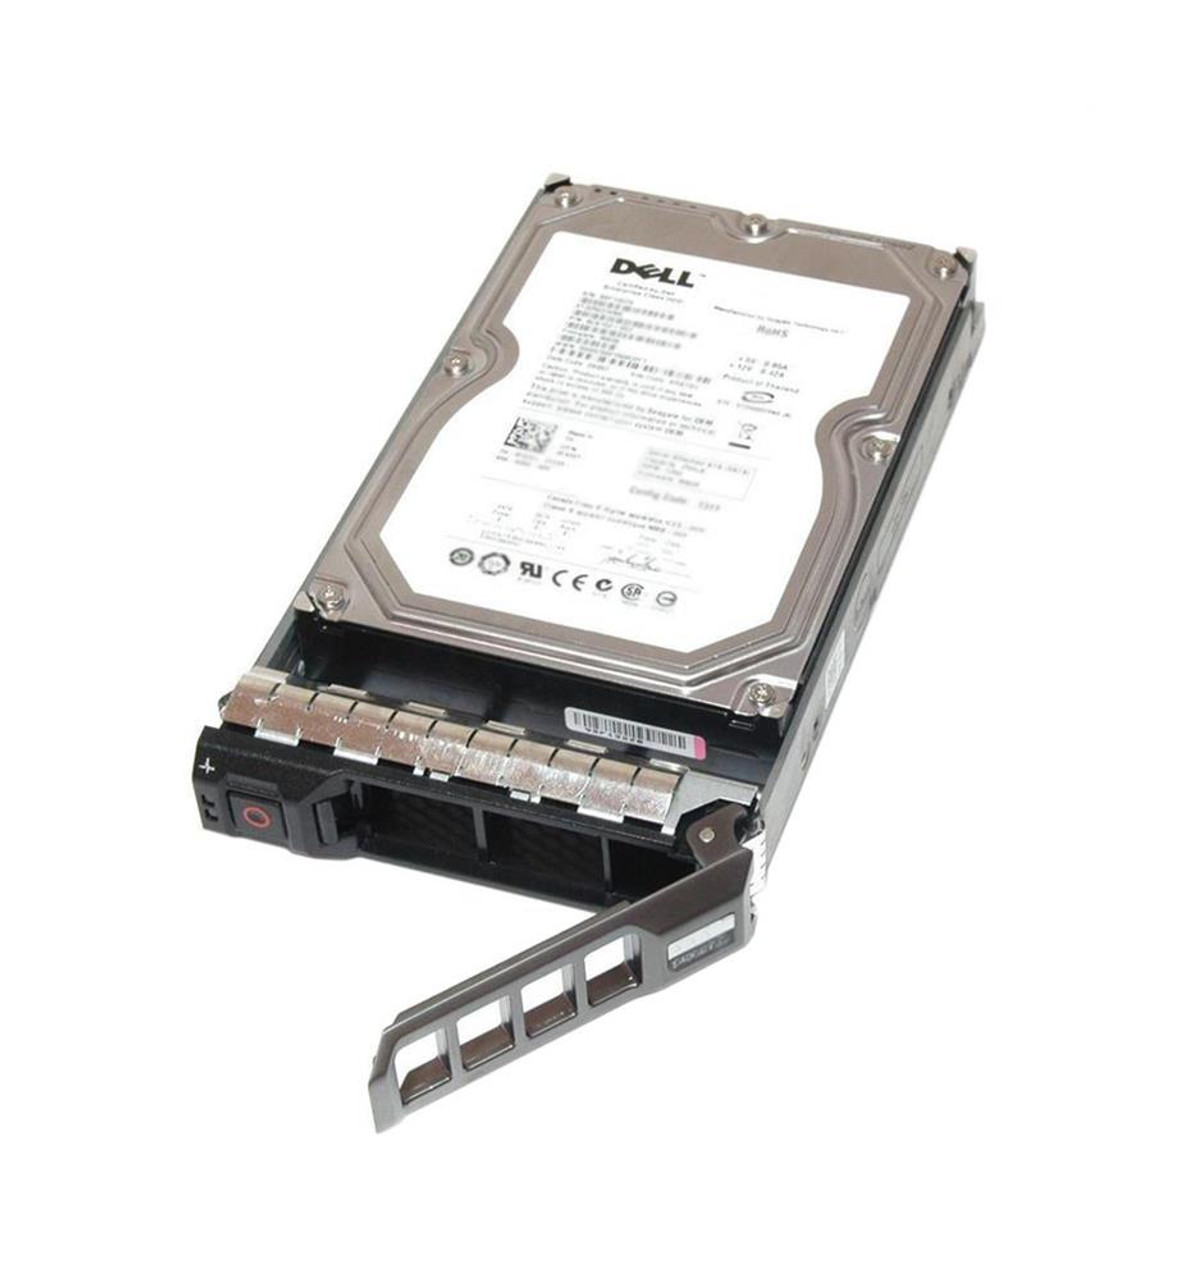 0975190-01 Dell 1TB 7200RPM SATA 6Gbps 64MB Cache 3.5-inch Internal Hard Drive with Tray for EqualLogic